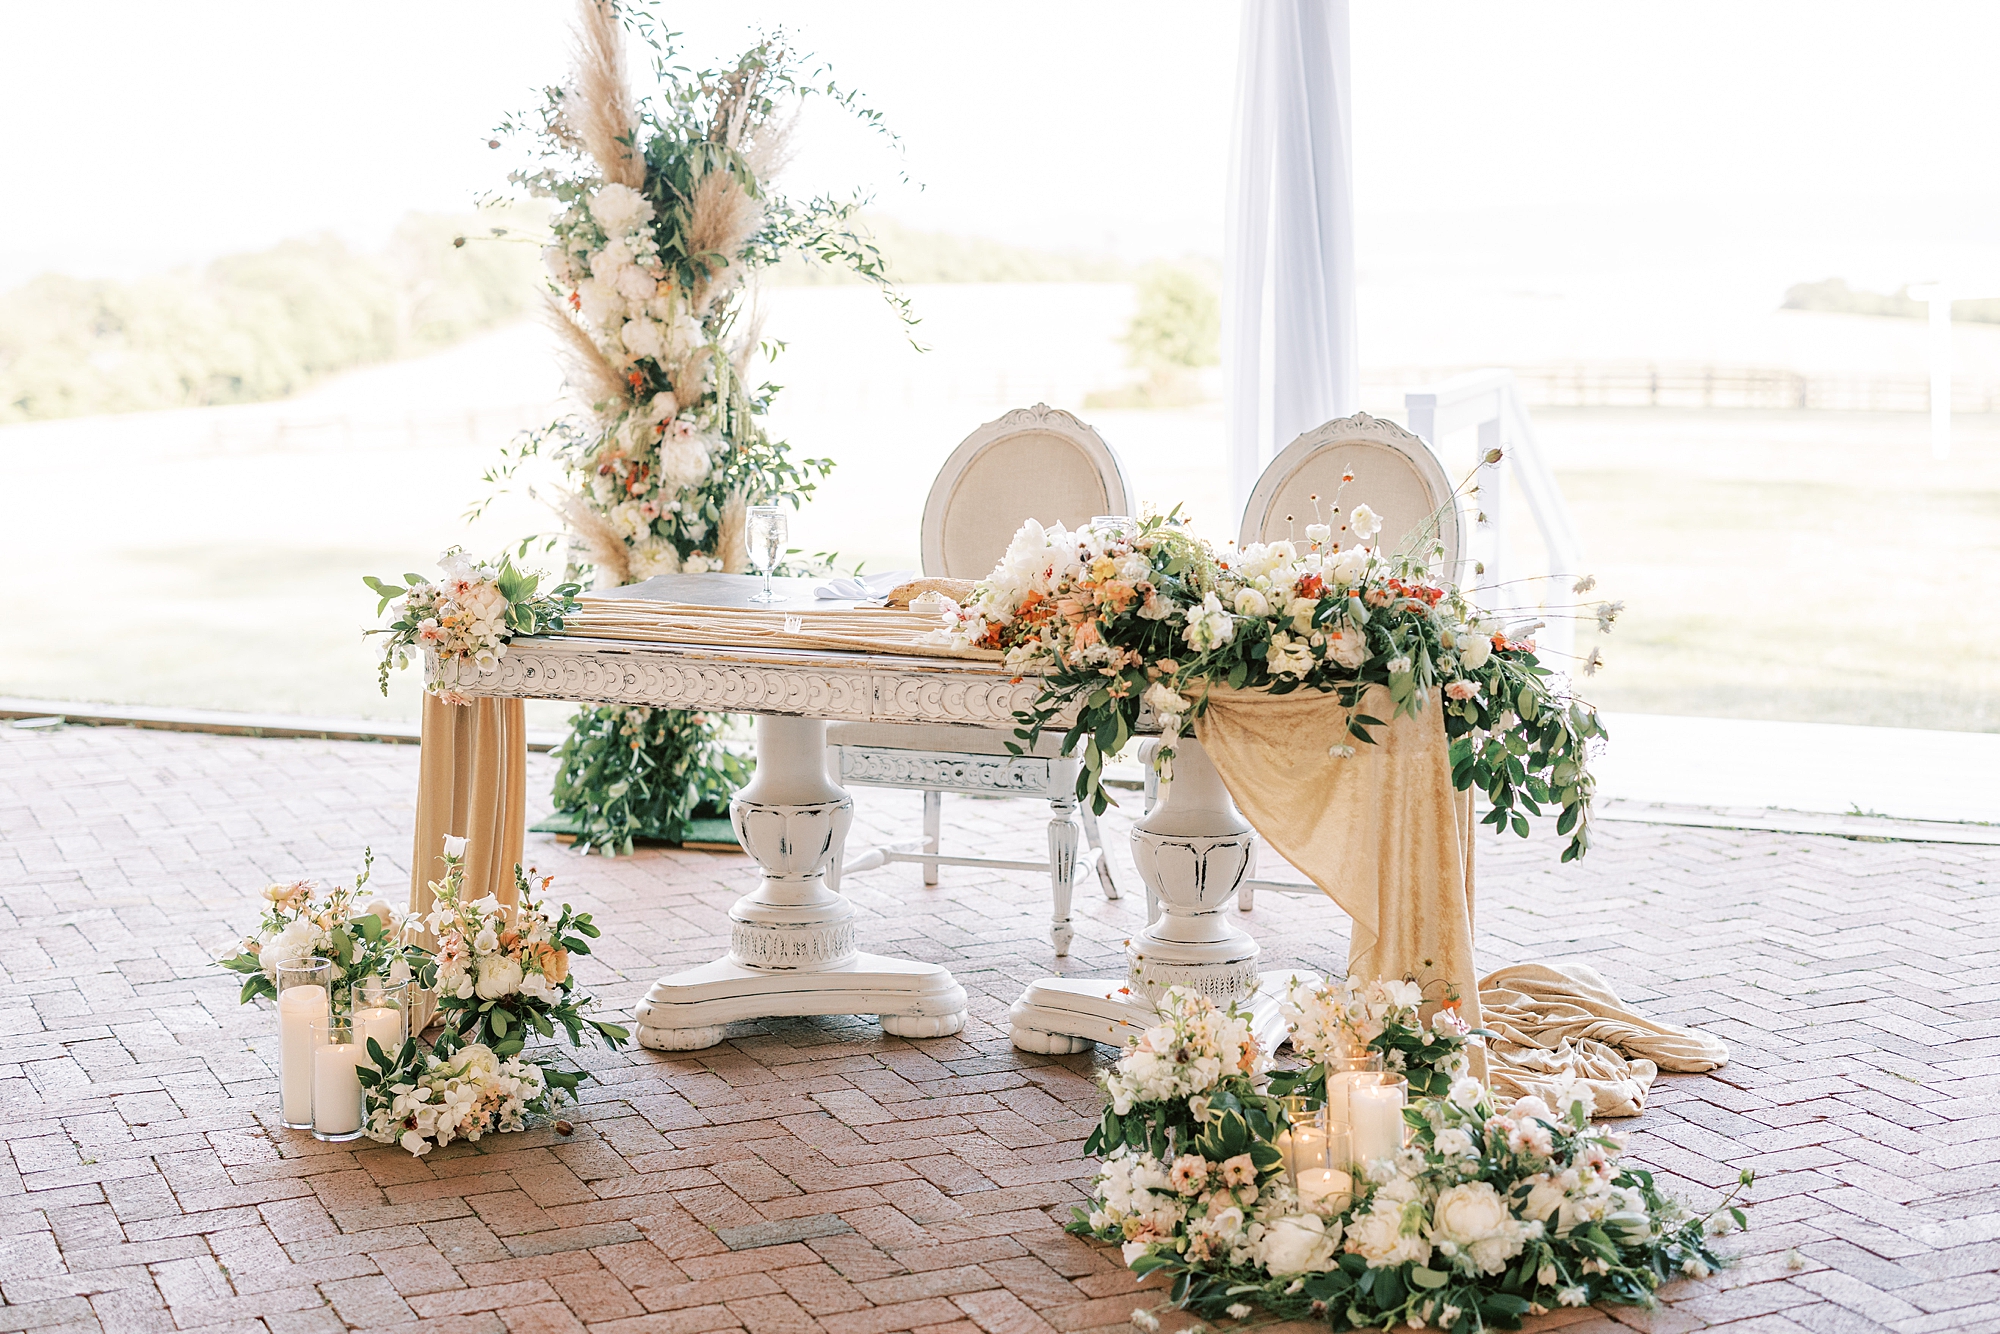 sweetheart table with overflowing white and pink flowers for wedding reception at Lauxmont Farms